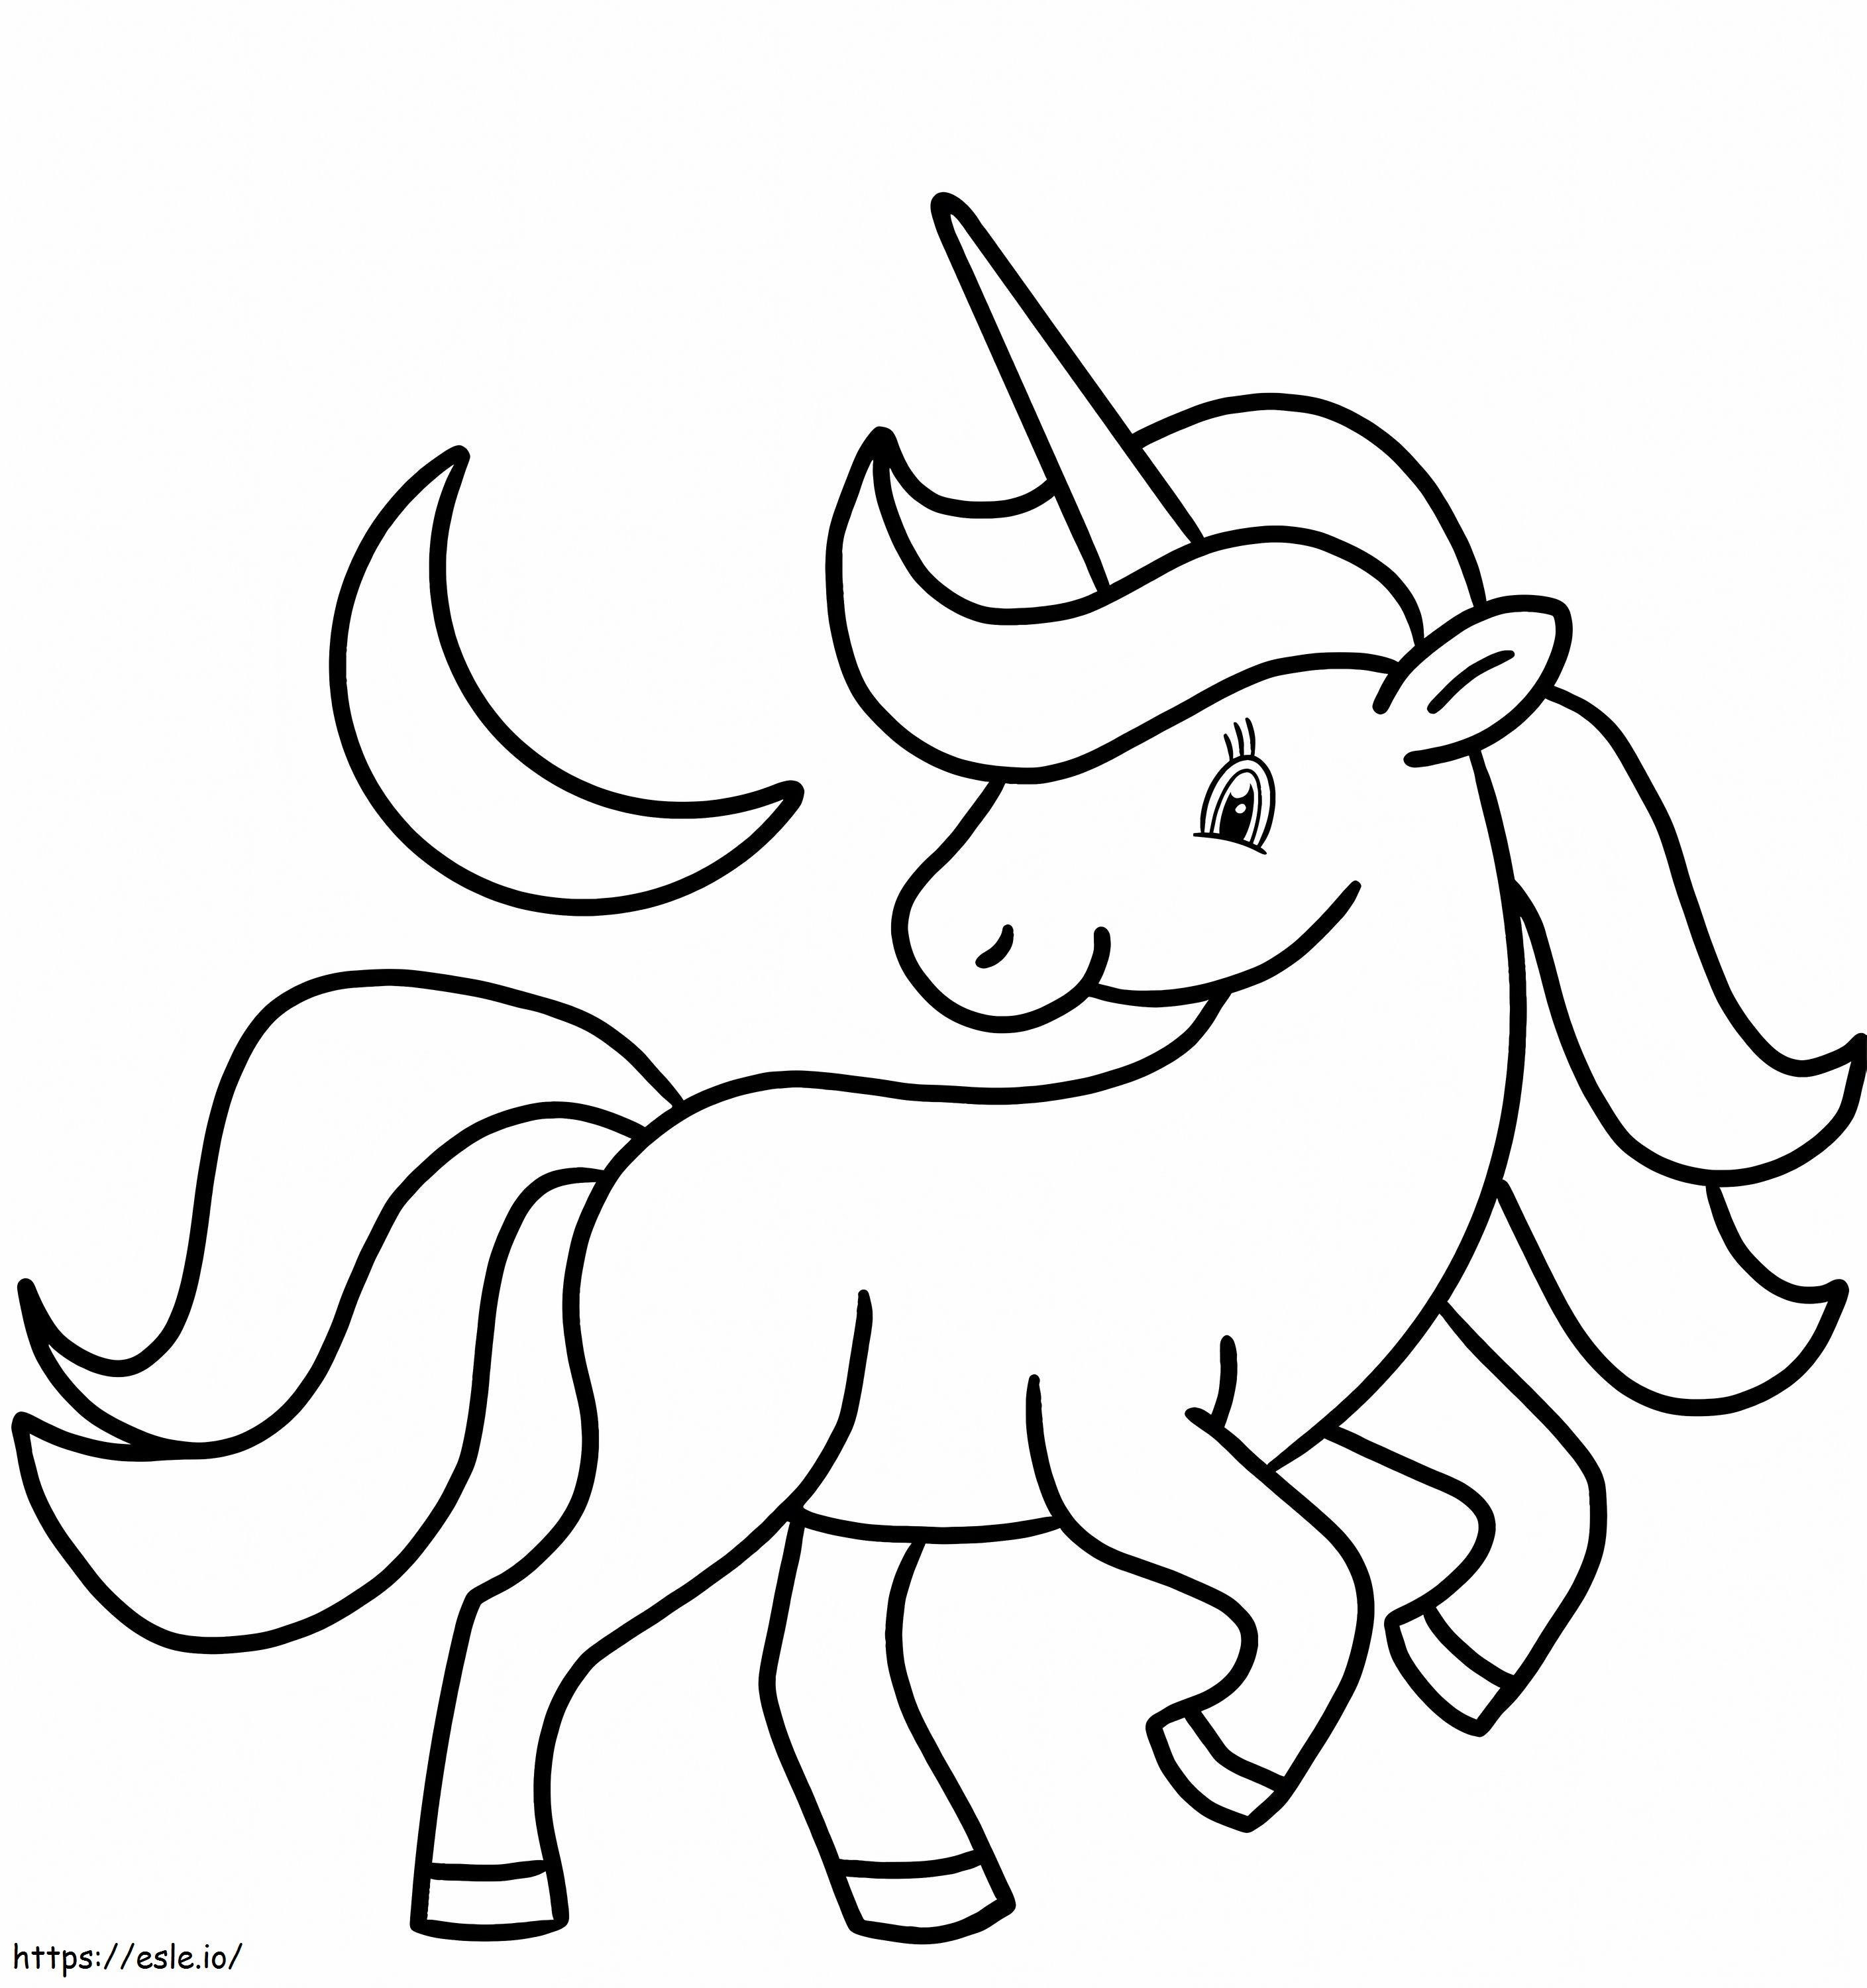 1576117282_Unicorn And Crescent Moon coloring page